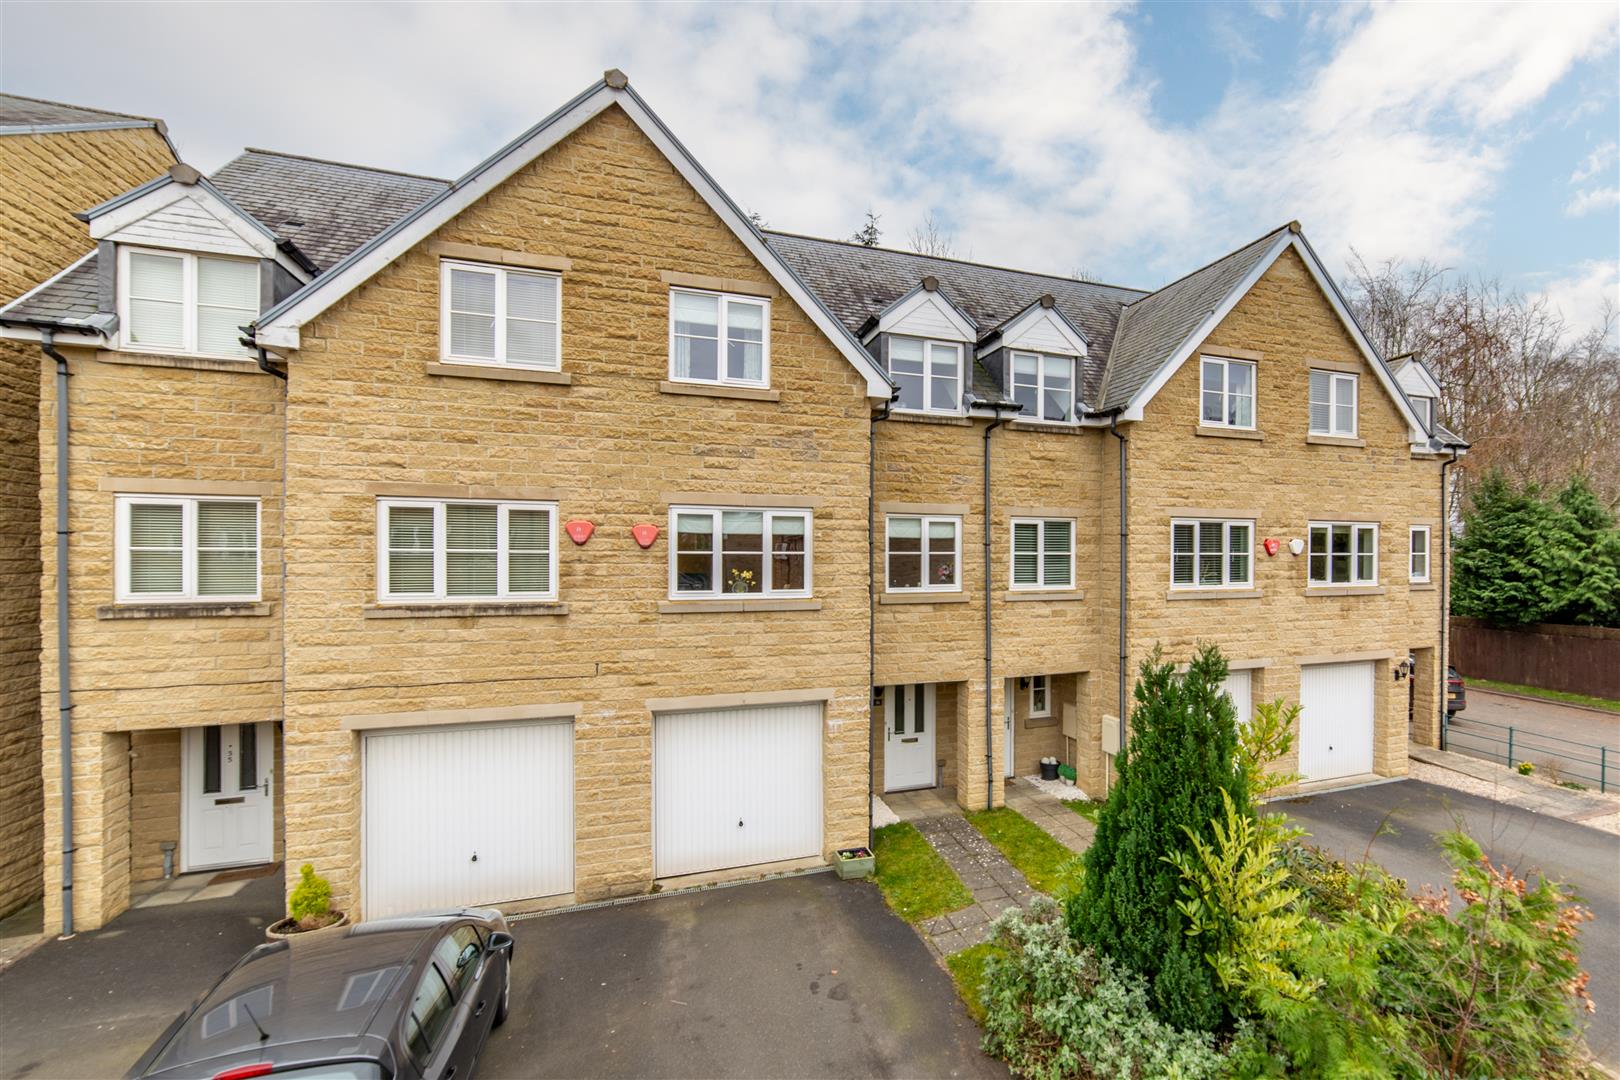 4 bed town house for sale in Southgate Mews, Morpeth, NE61